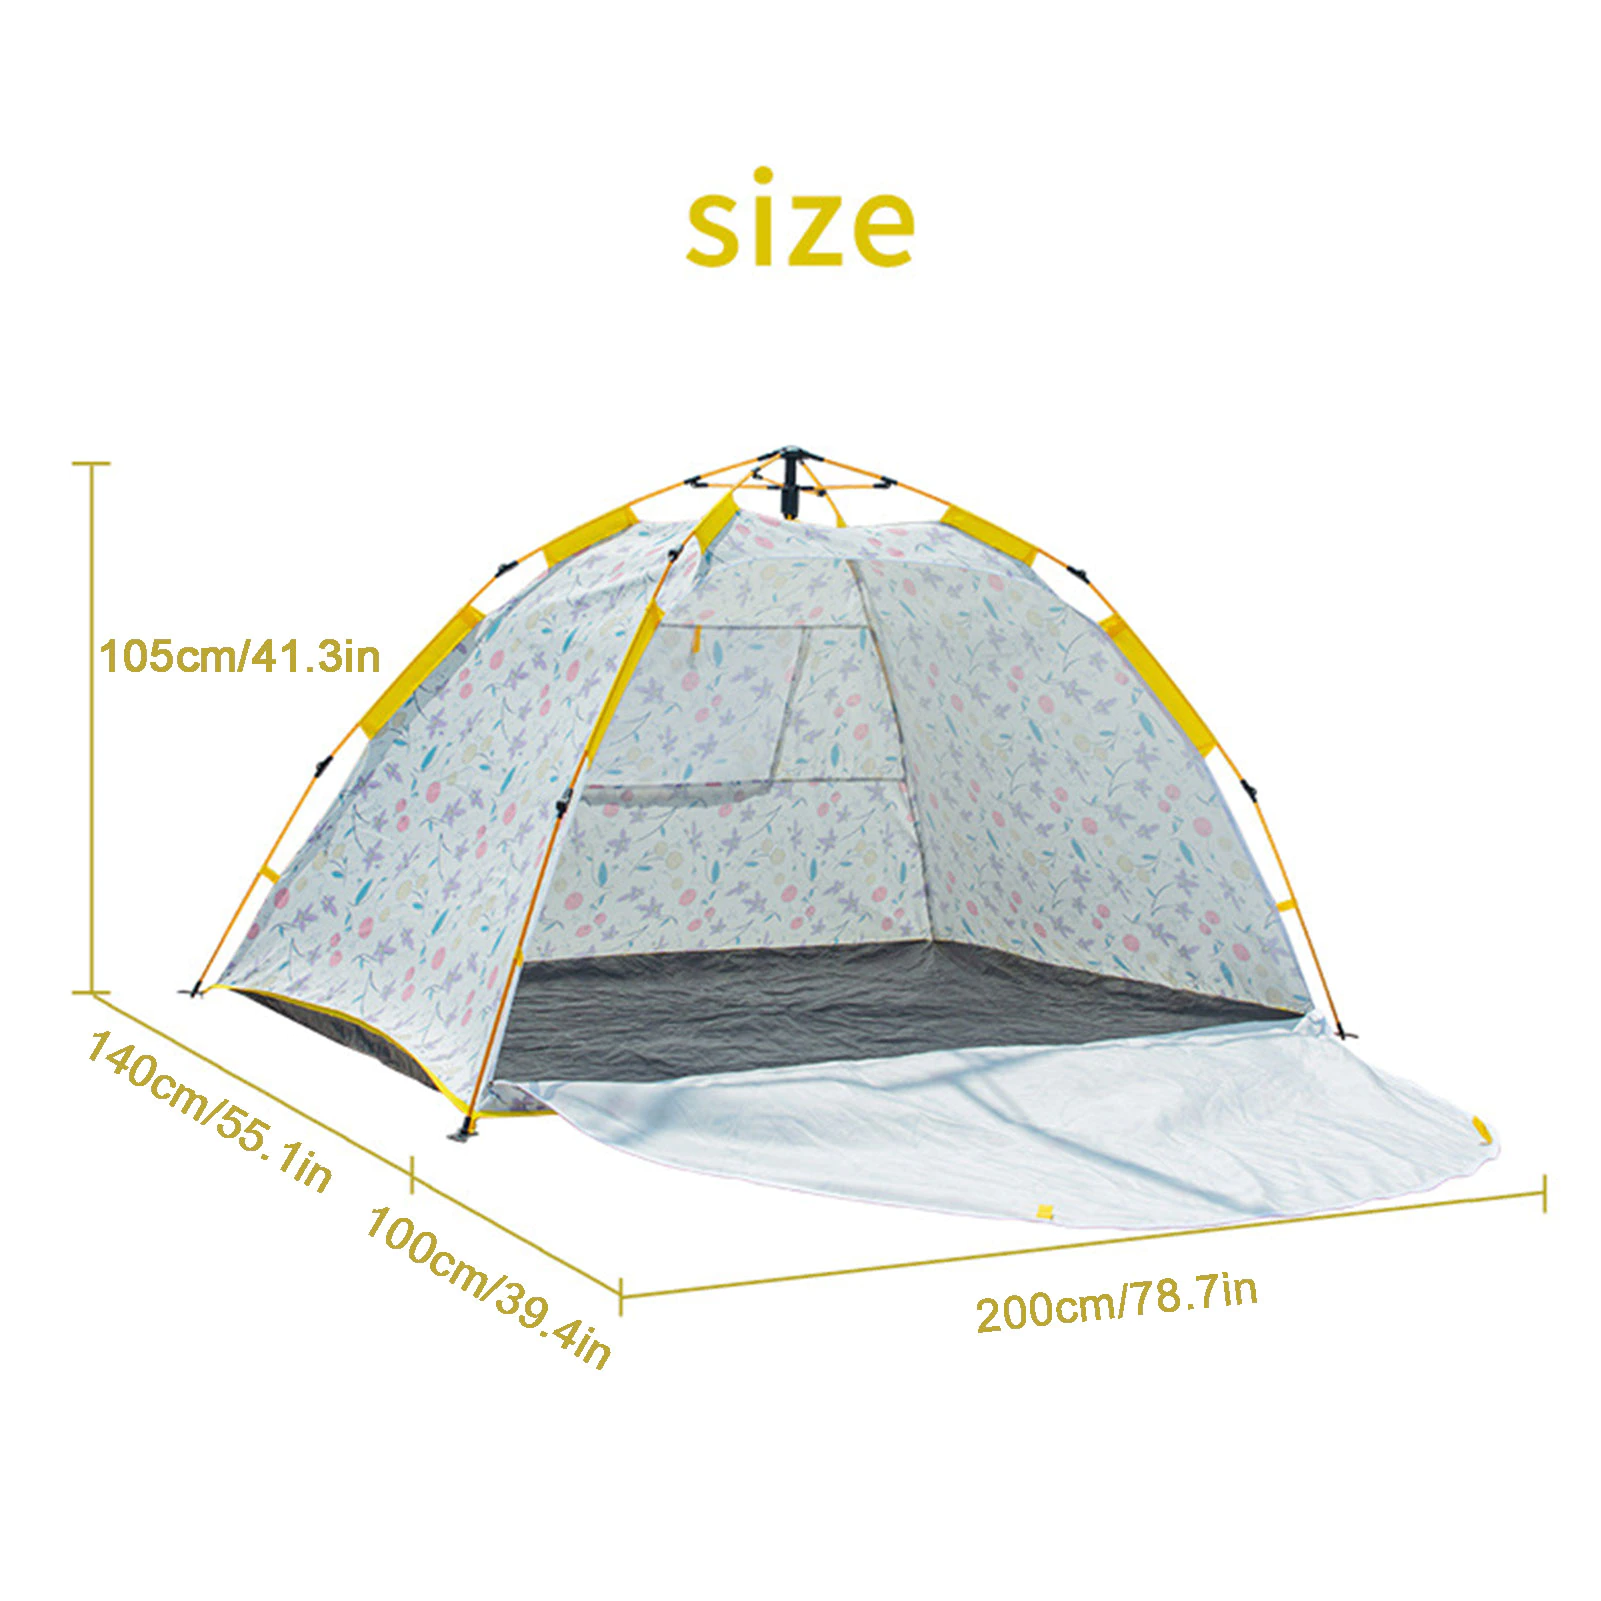 Cheap Goat Tents Sun Shelter Sun Shelter Shade Beach Tent UV Protection Ventilation Pop Up Beach Tent For 2 3 Person SPF 50 Sun Shade Shelter   